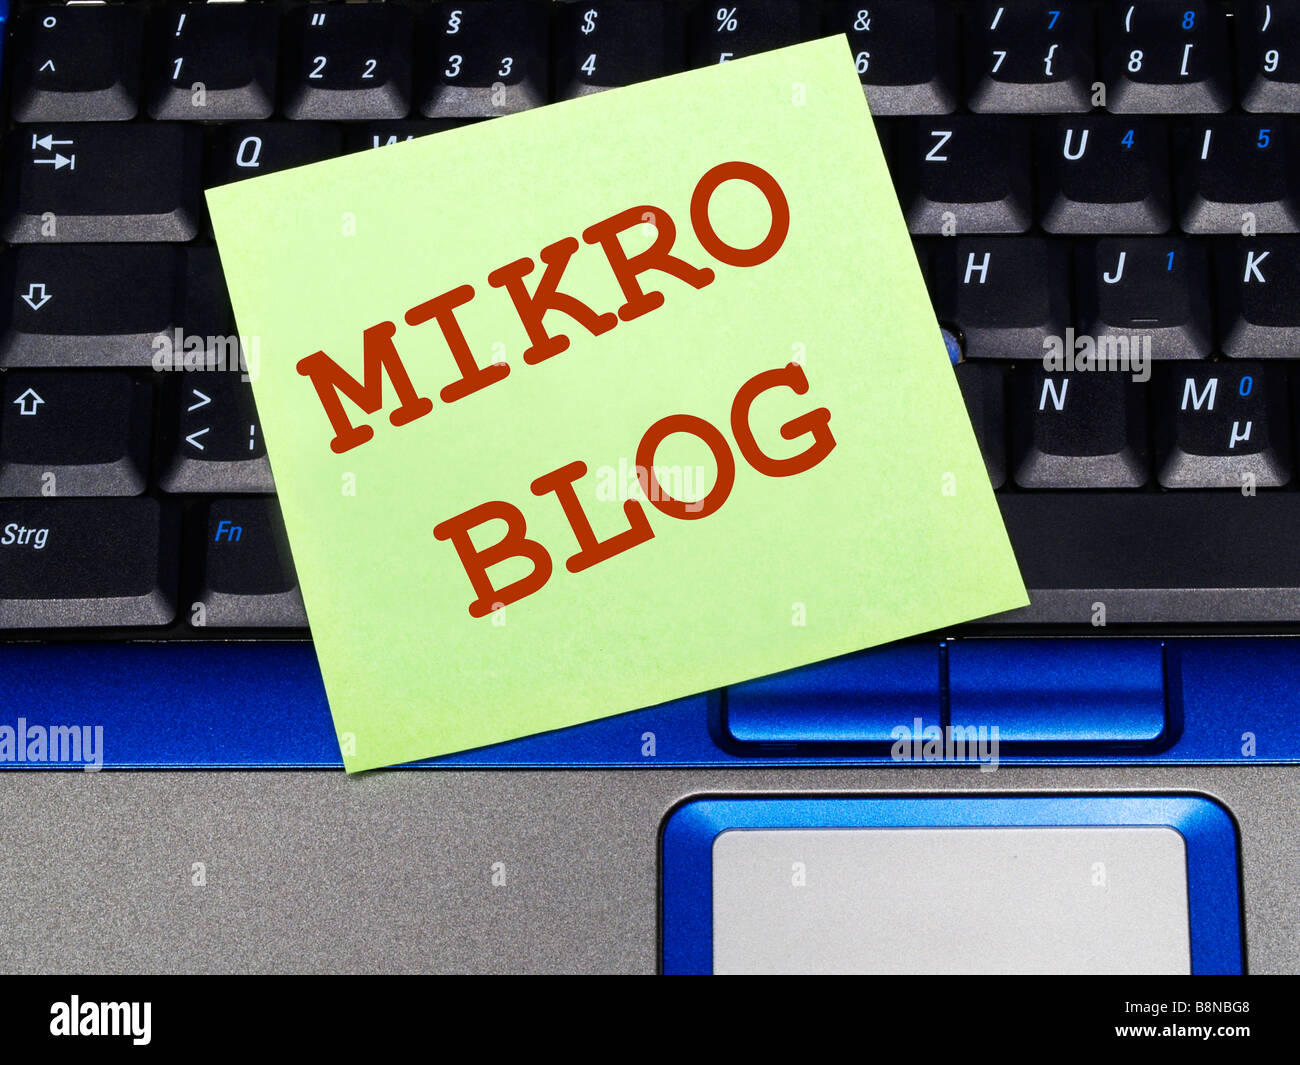 memo note on notebook, mikroblog Stock Photo